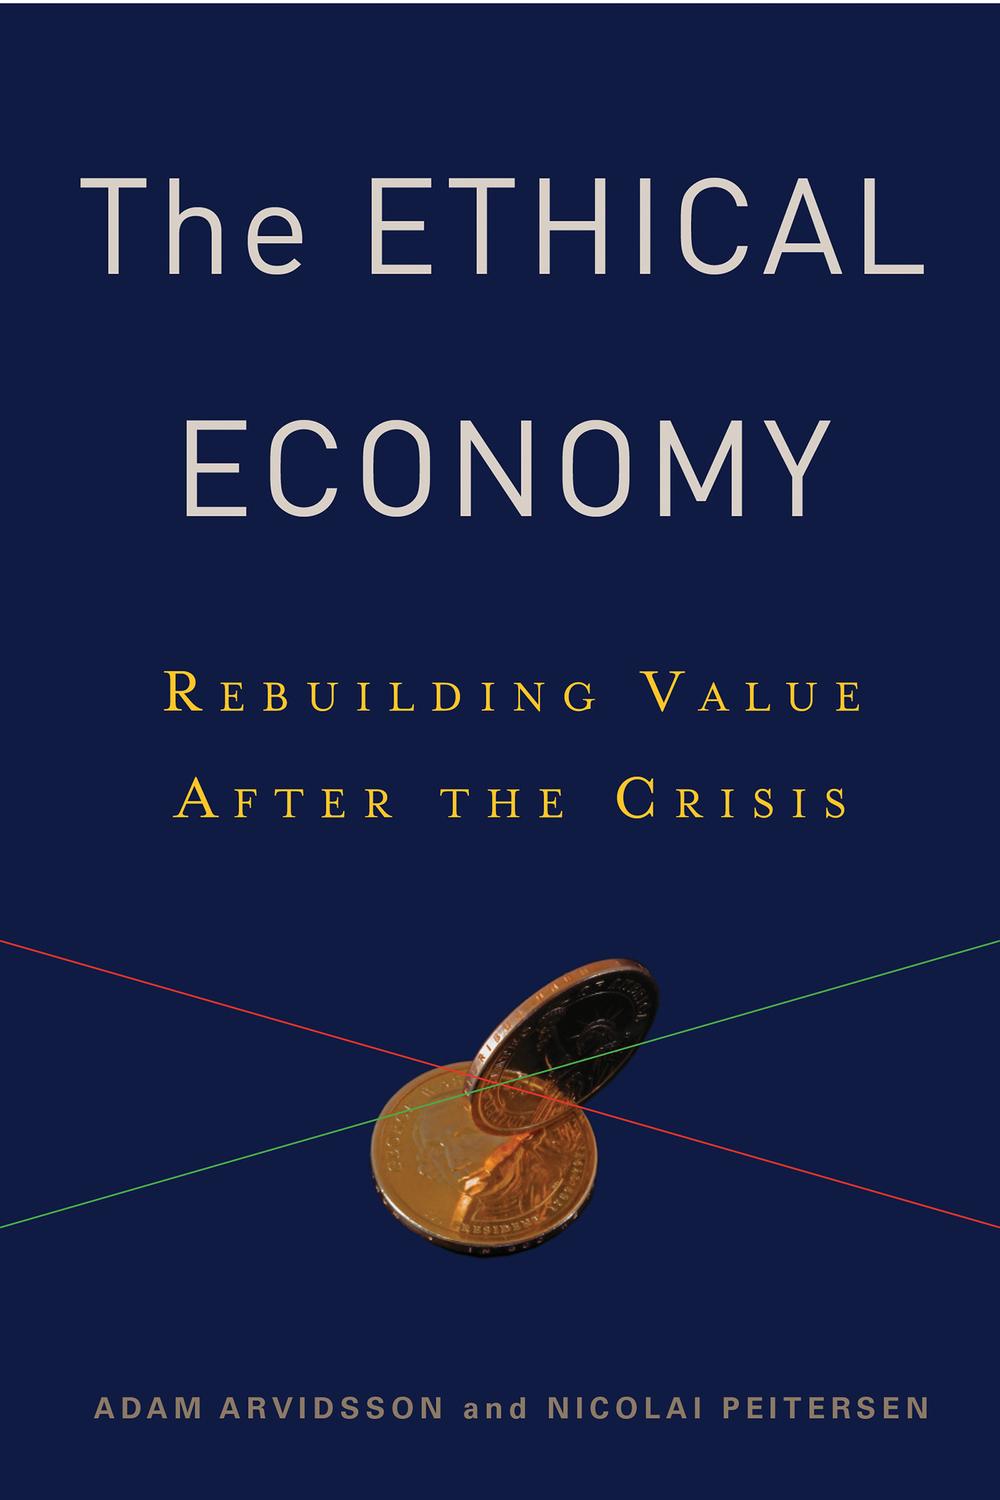 The Ethical Economy: Rebuilding Value After the Crisis